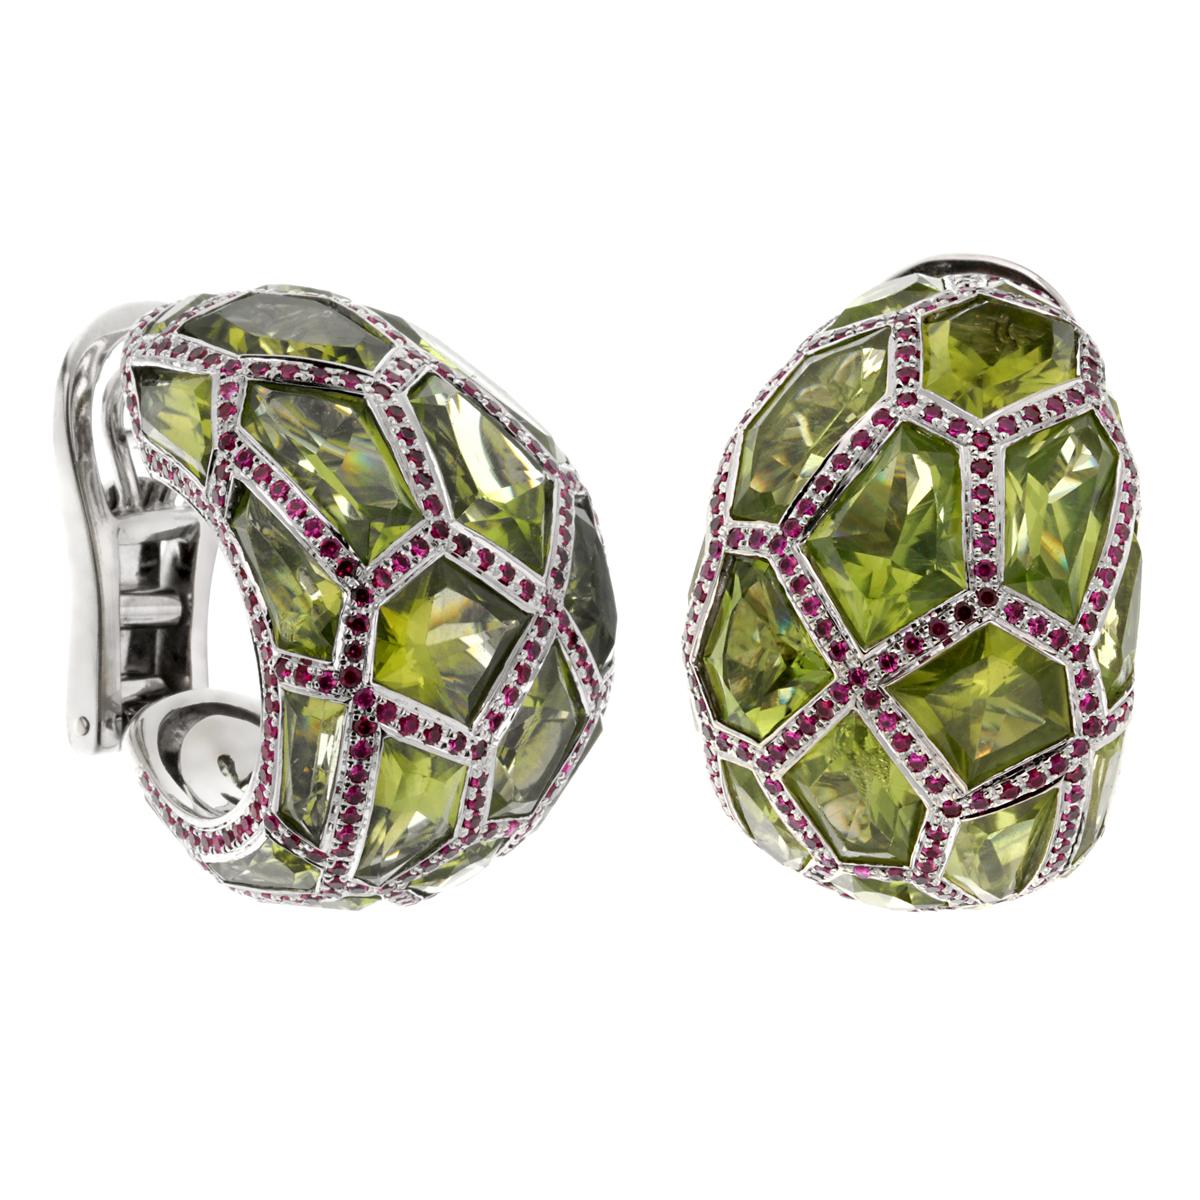 A magnificent set of De Grisogono earrings each showcasing a tapered bombe hoop design set with fancy cut peridot within a ruby-set surround honeycomb design. The earrings are 18k white gold and are signed De Grisogono, and the unique serial number.